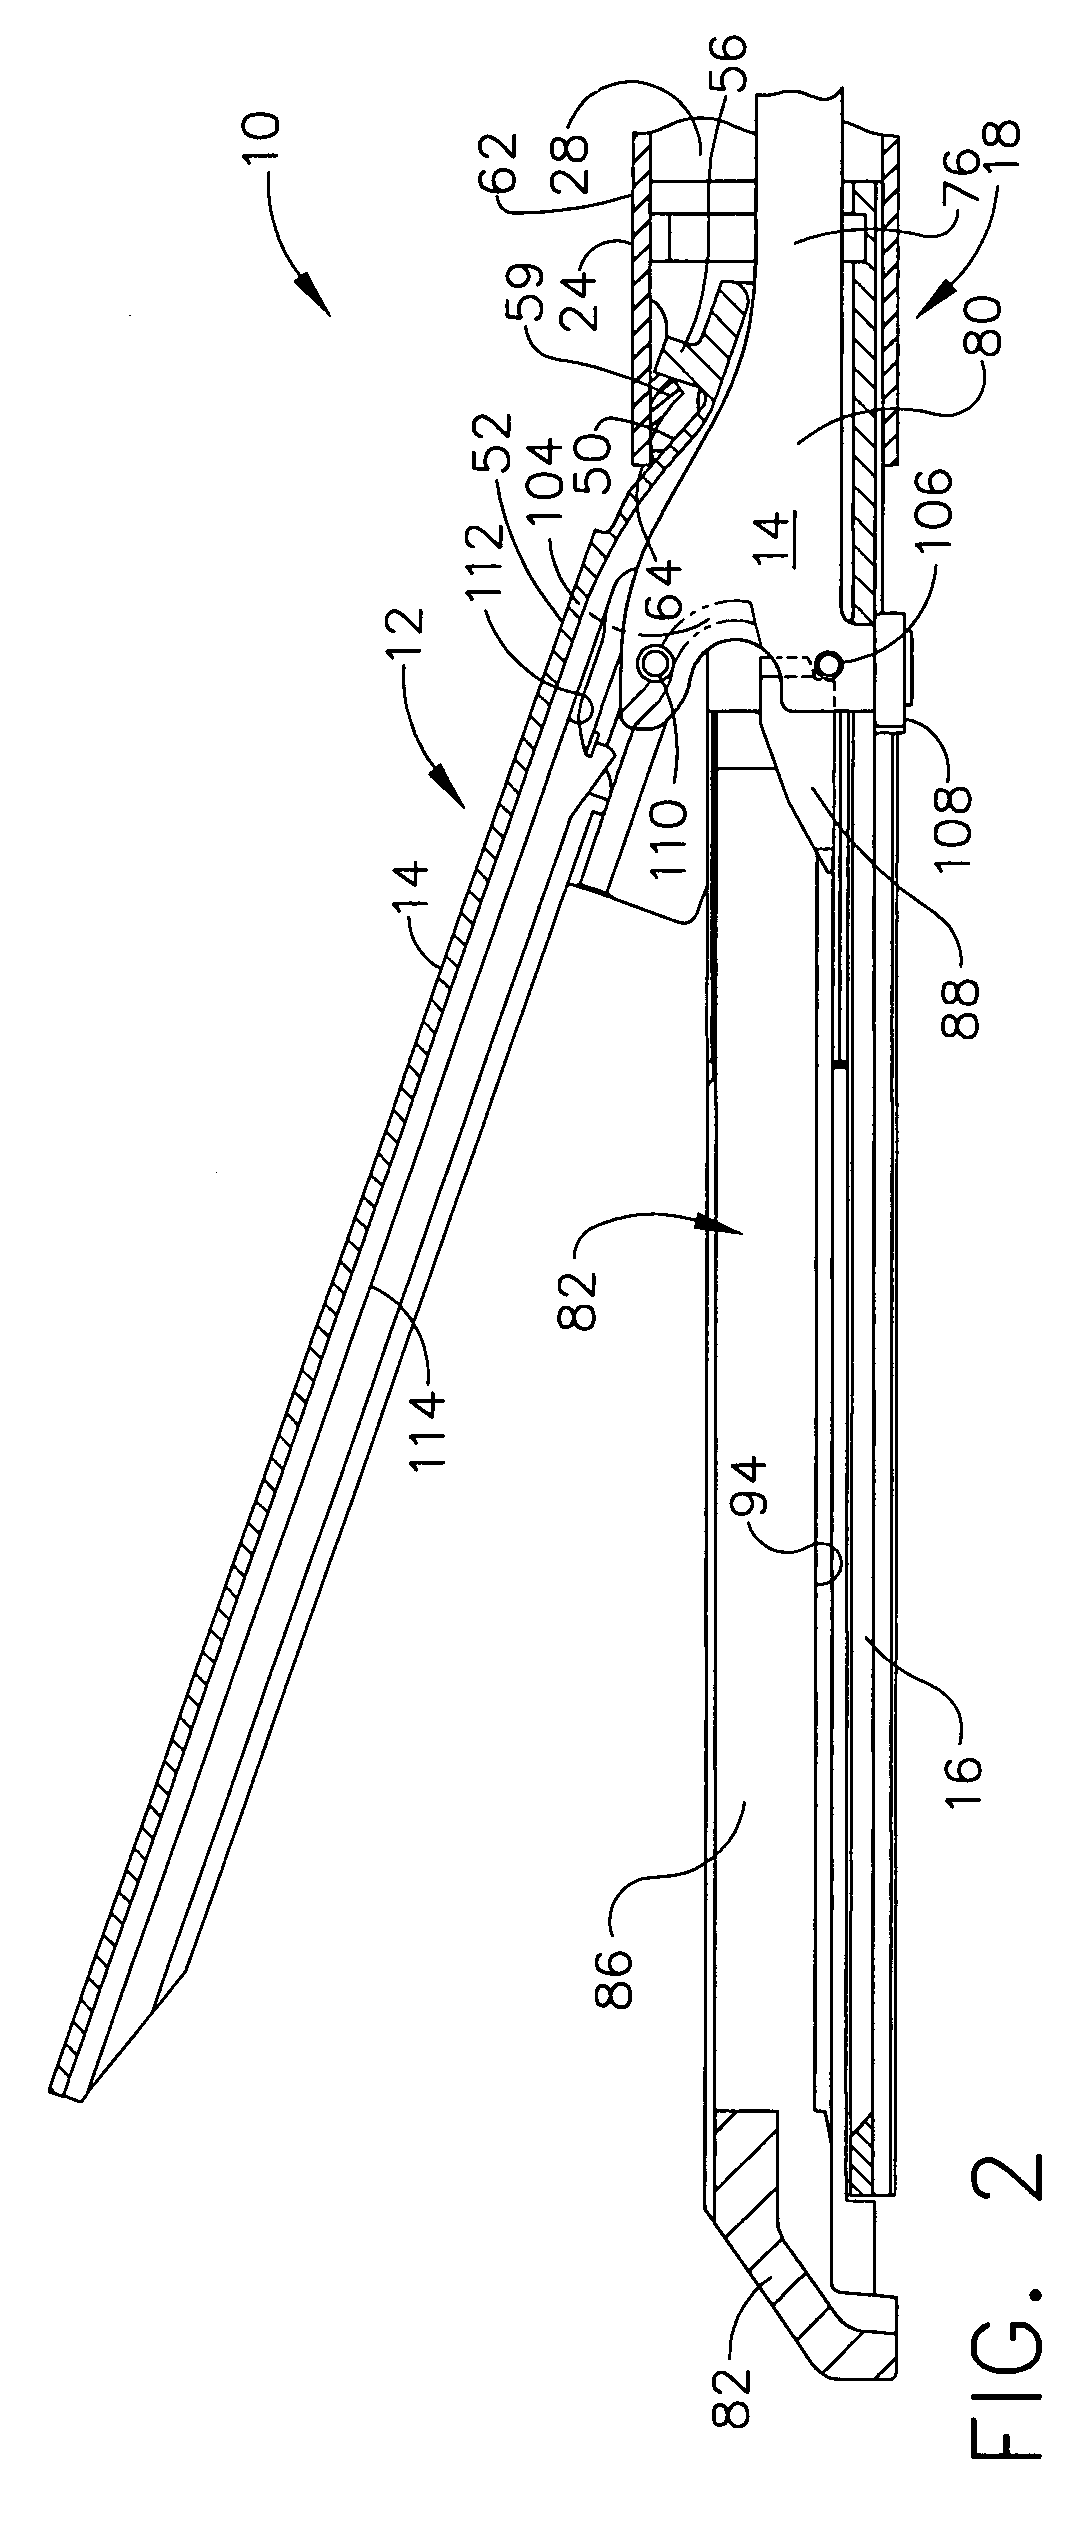 Surgical stapling and cutting instrument with manually retractable firing member